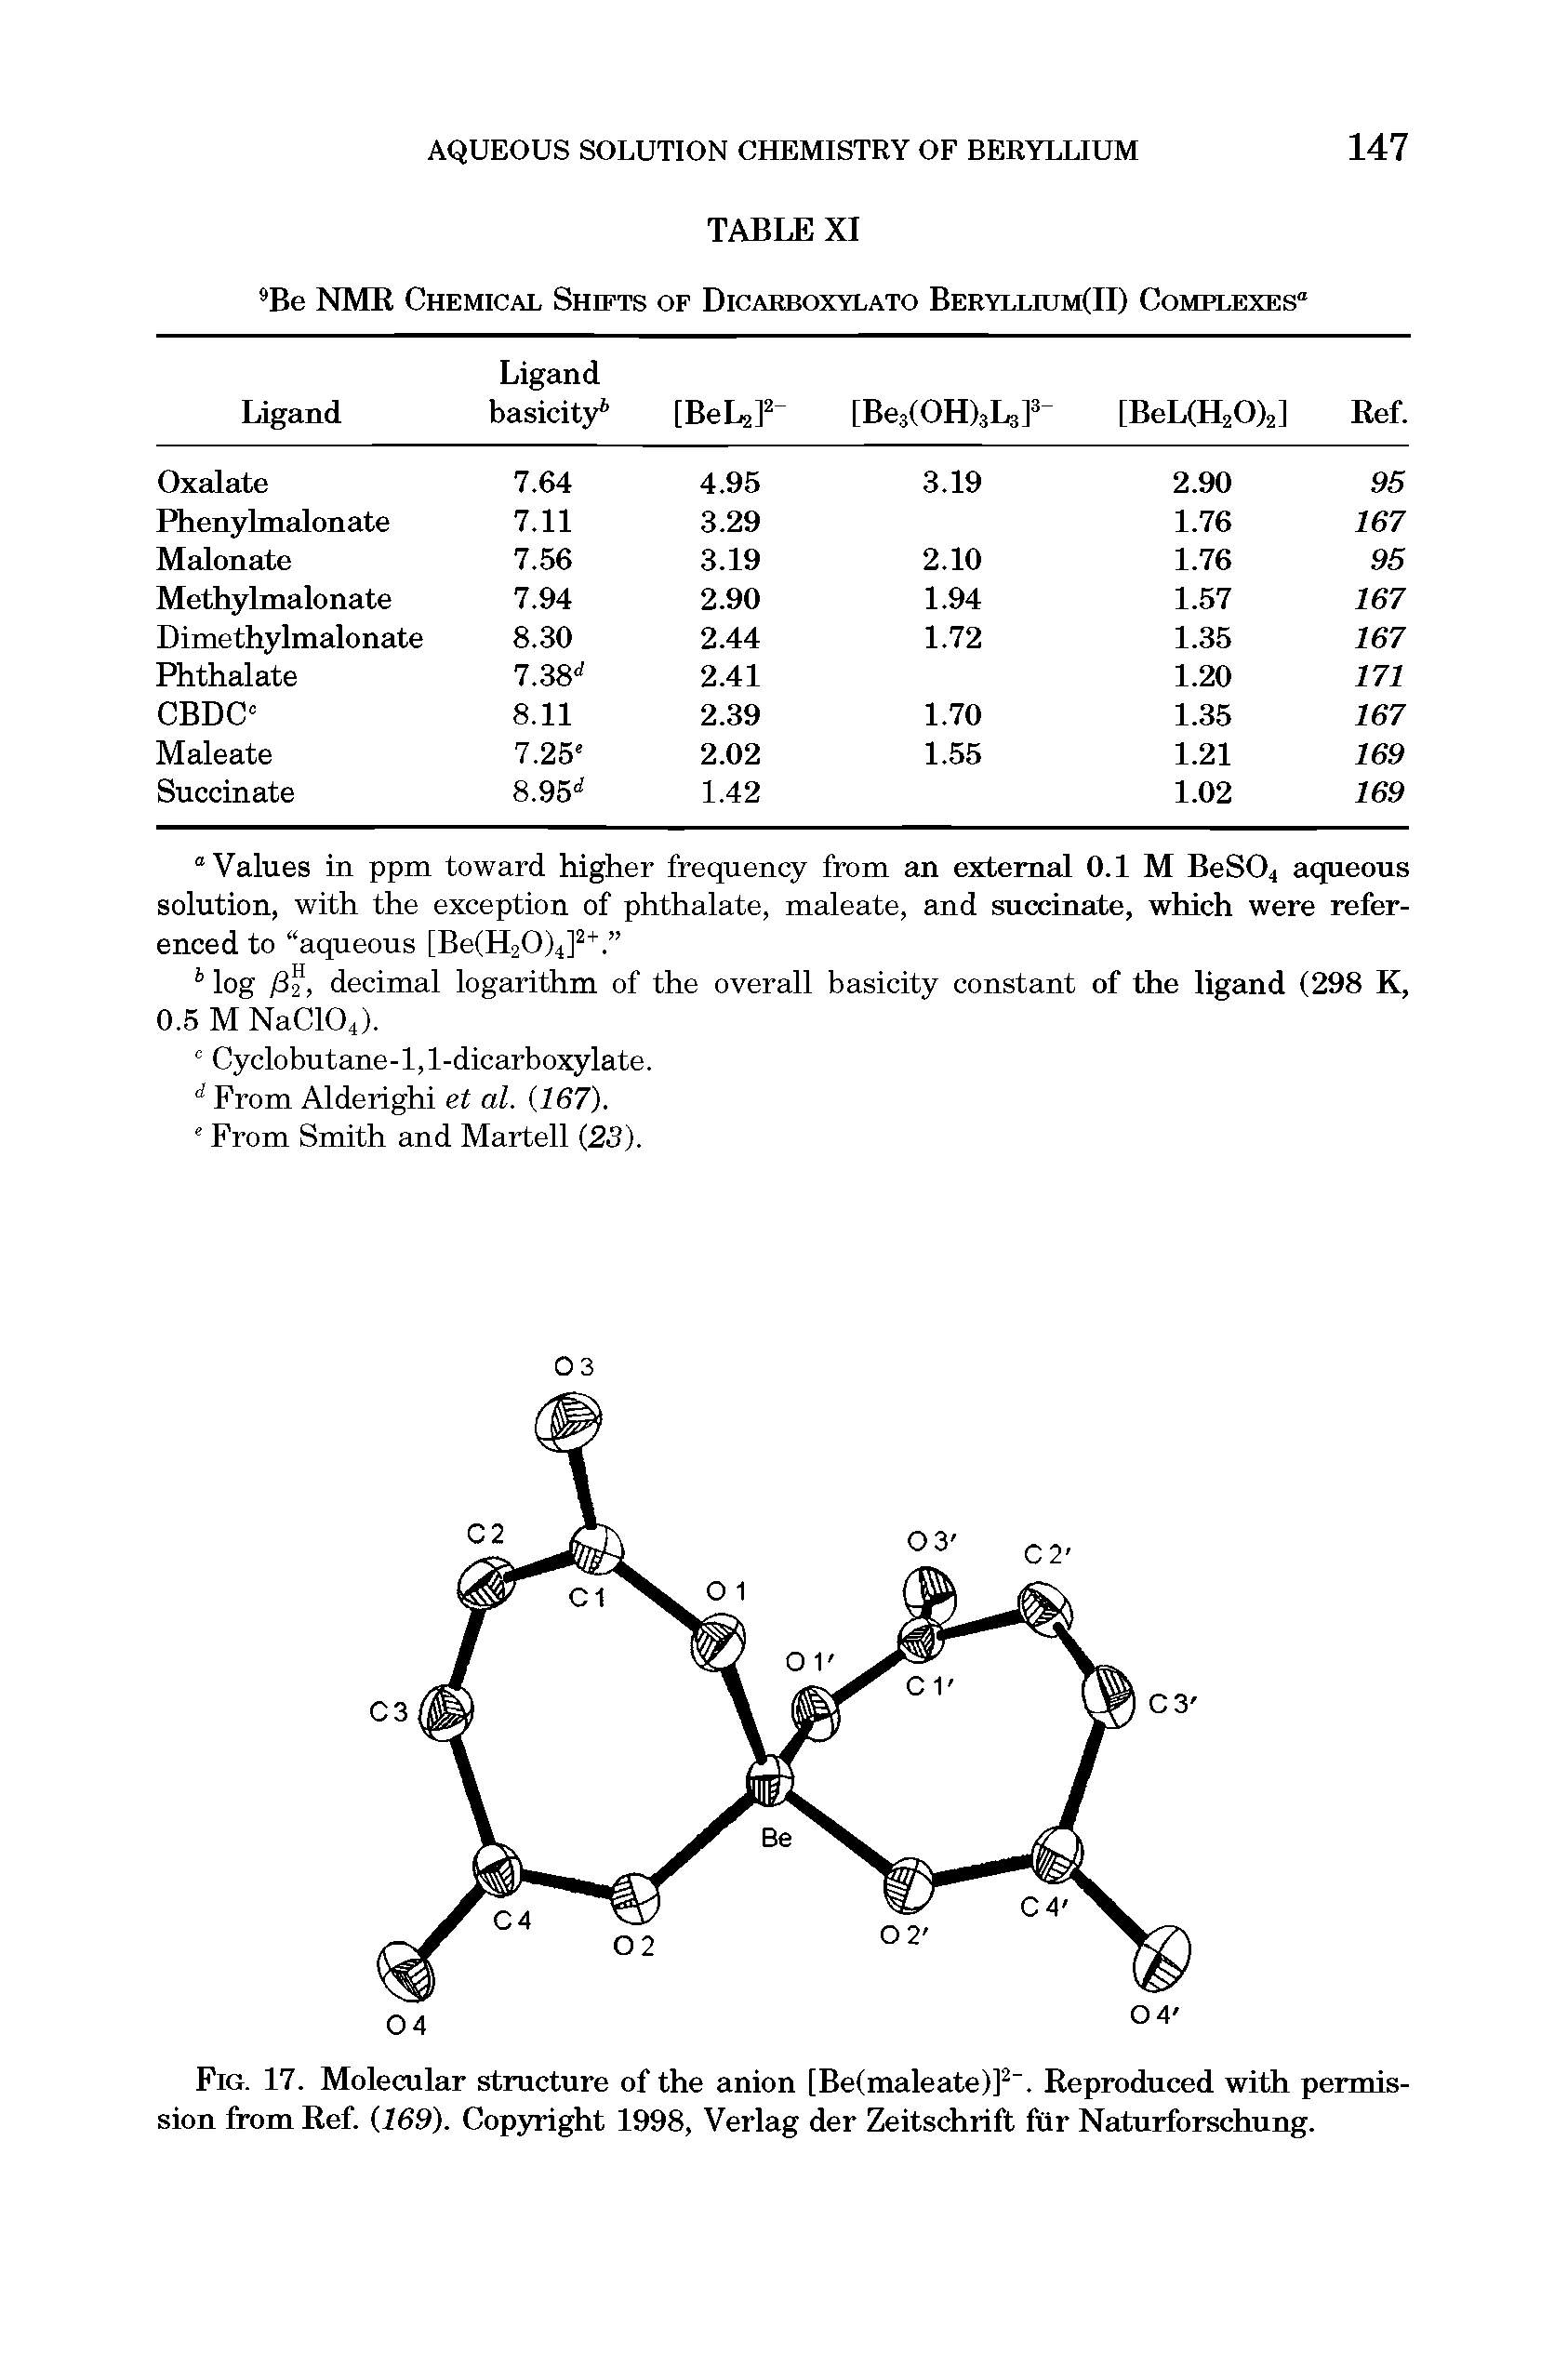 Fig. 17. Molecular structure of the anion [Be(maleate)]2. Reproduced with permission from Ref. (169). Copyright 1998, Verlag der Zeitschrift fur Naturforschung.